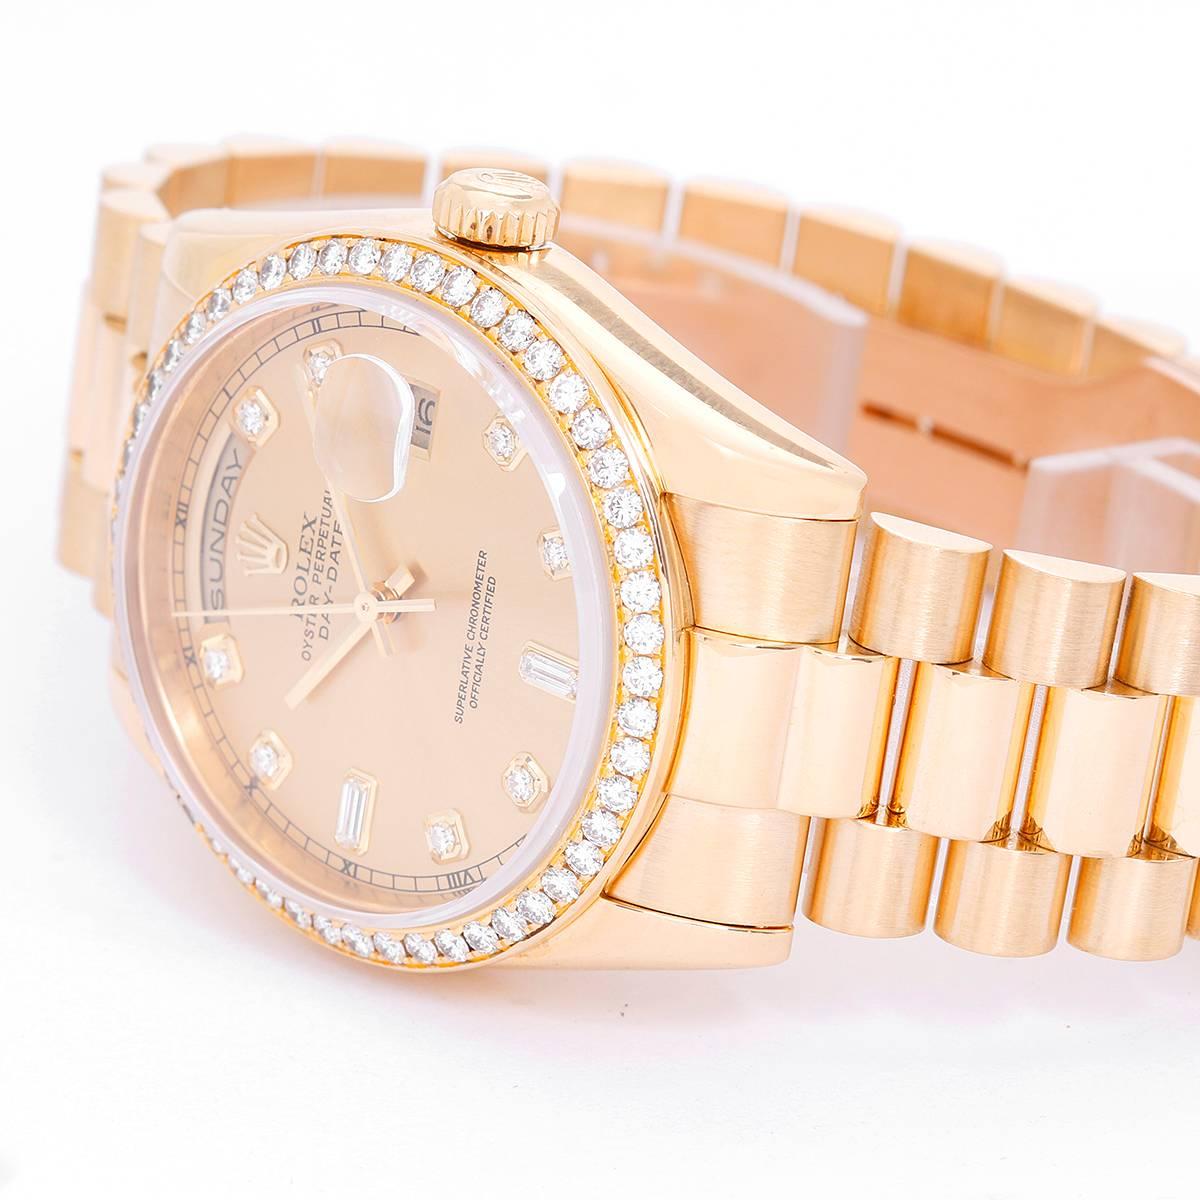 Rolex President Day-Date Men's Yellow Gold Watch Factory Diamonds 118348 -  Automatic winding, 31 jewels, Quickset, sapphire crystal. 18k yellow gold case with factory diamond bezel  (36mm diameter). Factory champagne diamond dial. 18k yellow gold